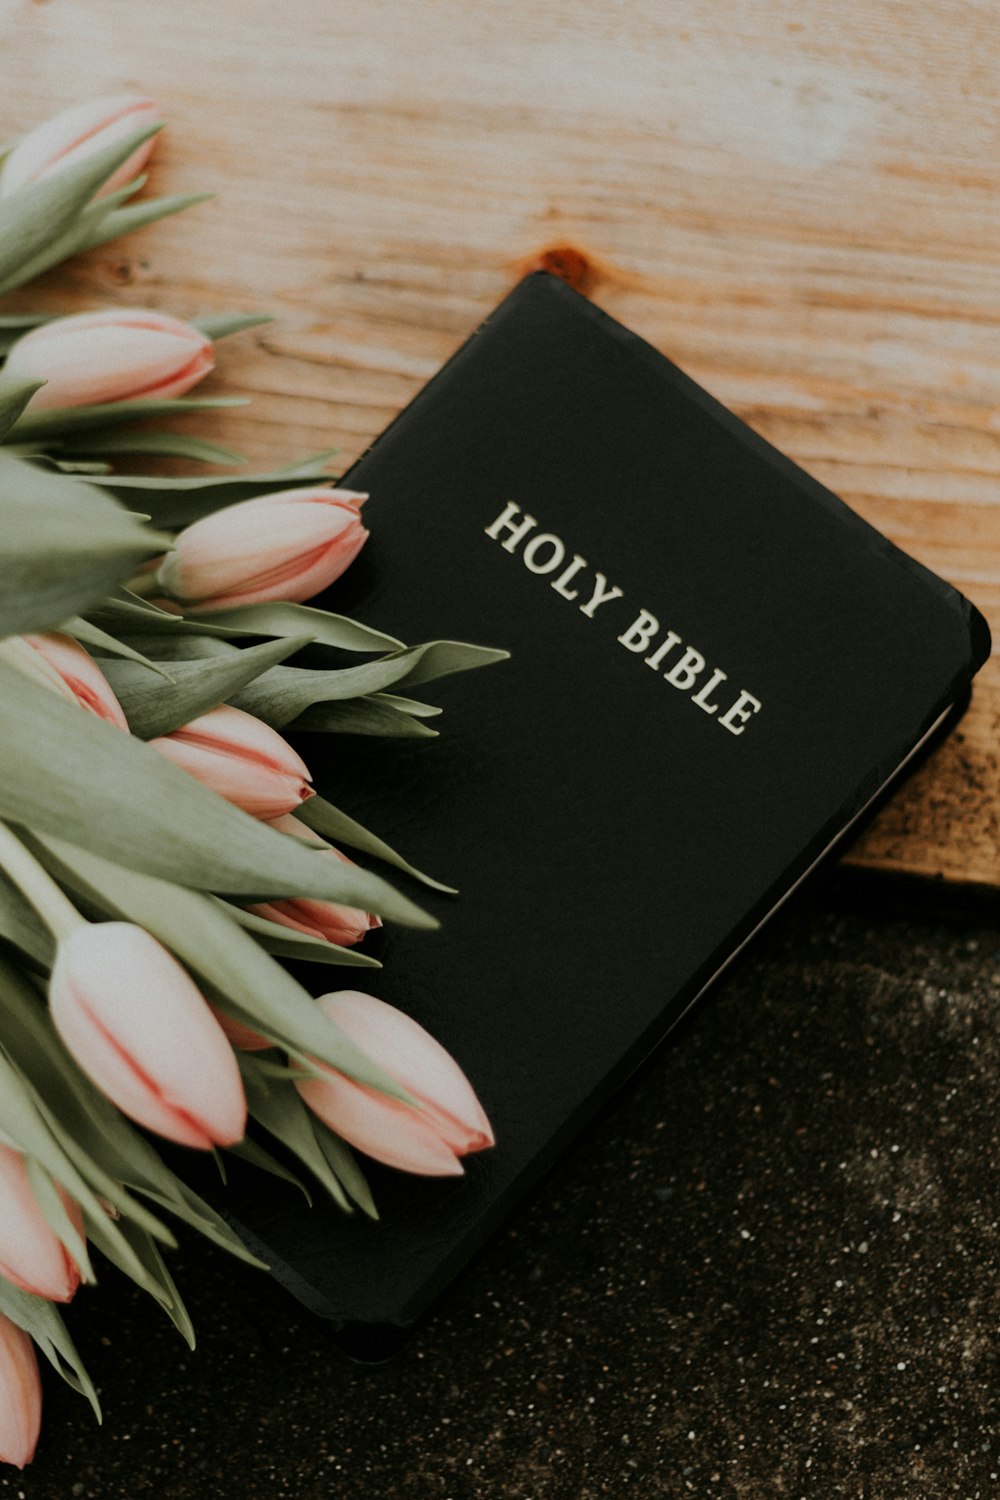 27+ Holy Bible Pictures | Download Free Images on Unsplash